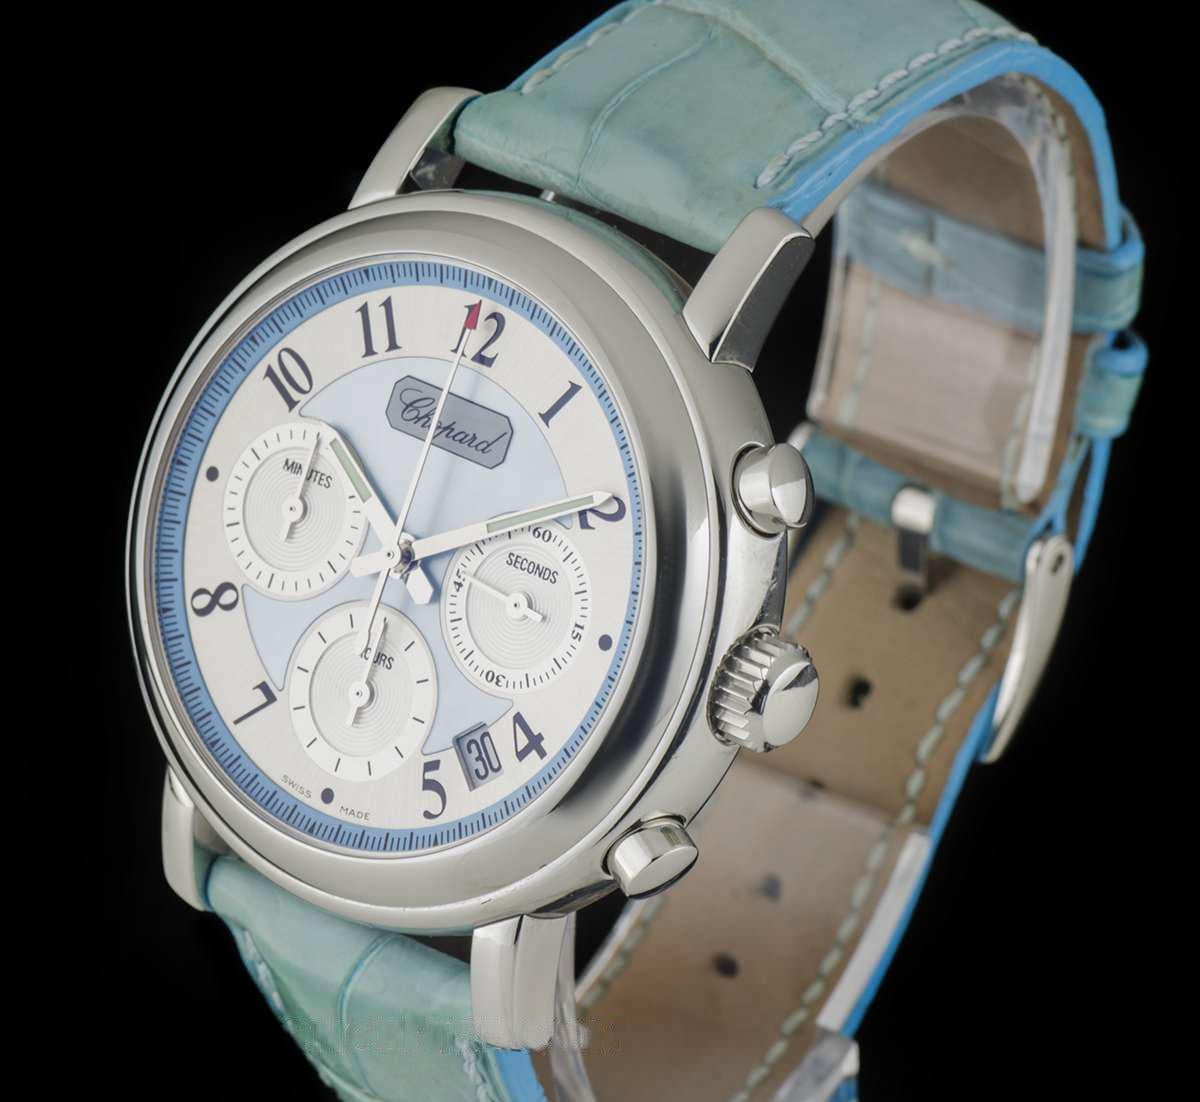 A 39mm Stainless Steel Mille Miglia Limited Edition 'Elton John Aids Foundation' Wristwatch, blue mother of pearl and silver dial with arabic numbers, small seconds sub dial at 3 0'clock, date between 4 and 5 0'clock, 12 hour recorder at 6 0'clock,